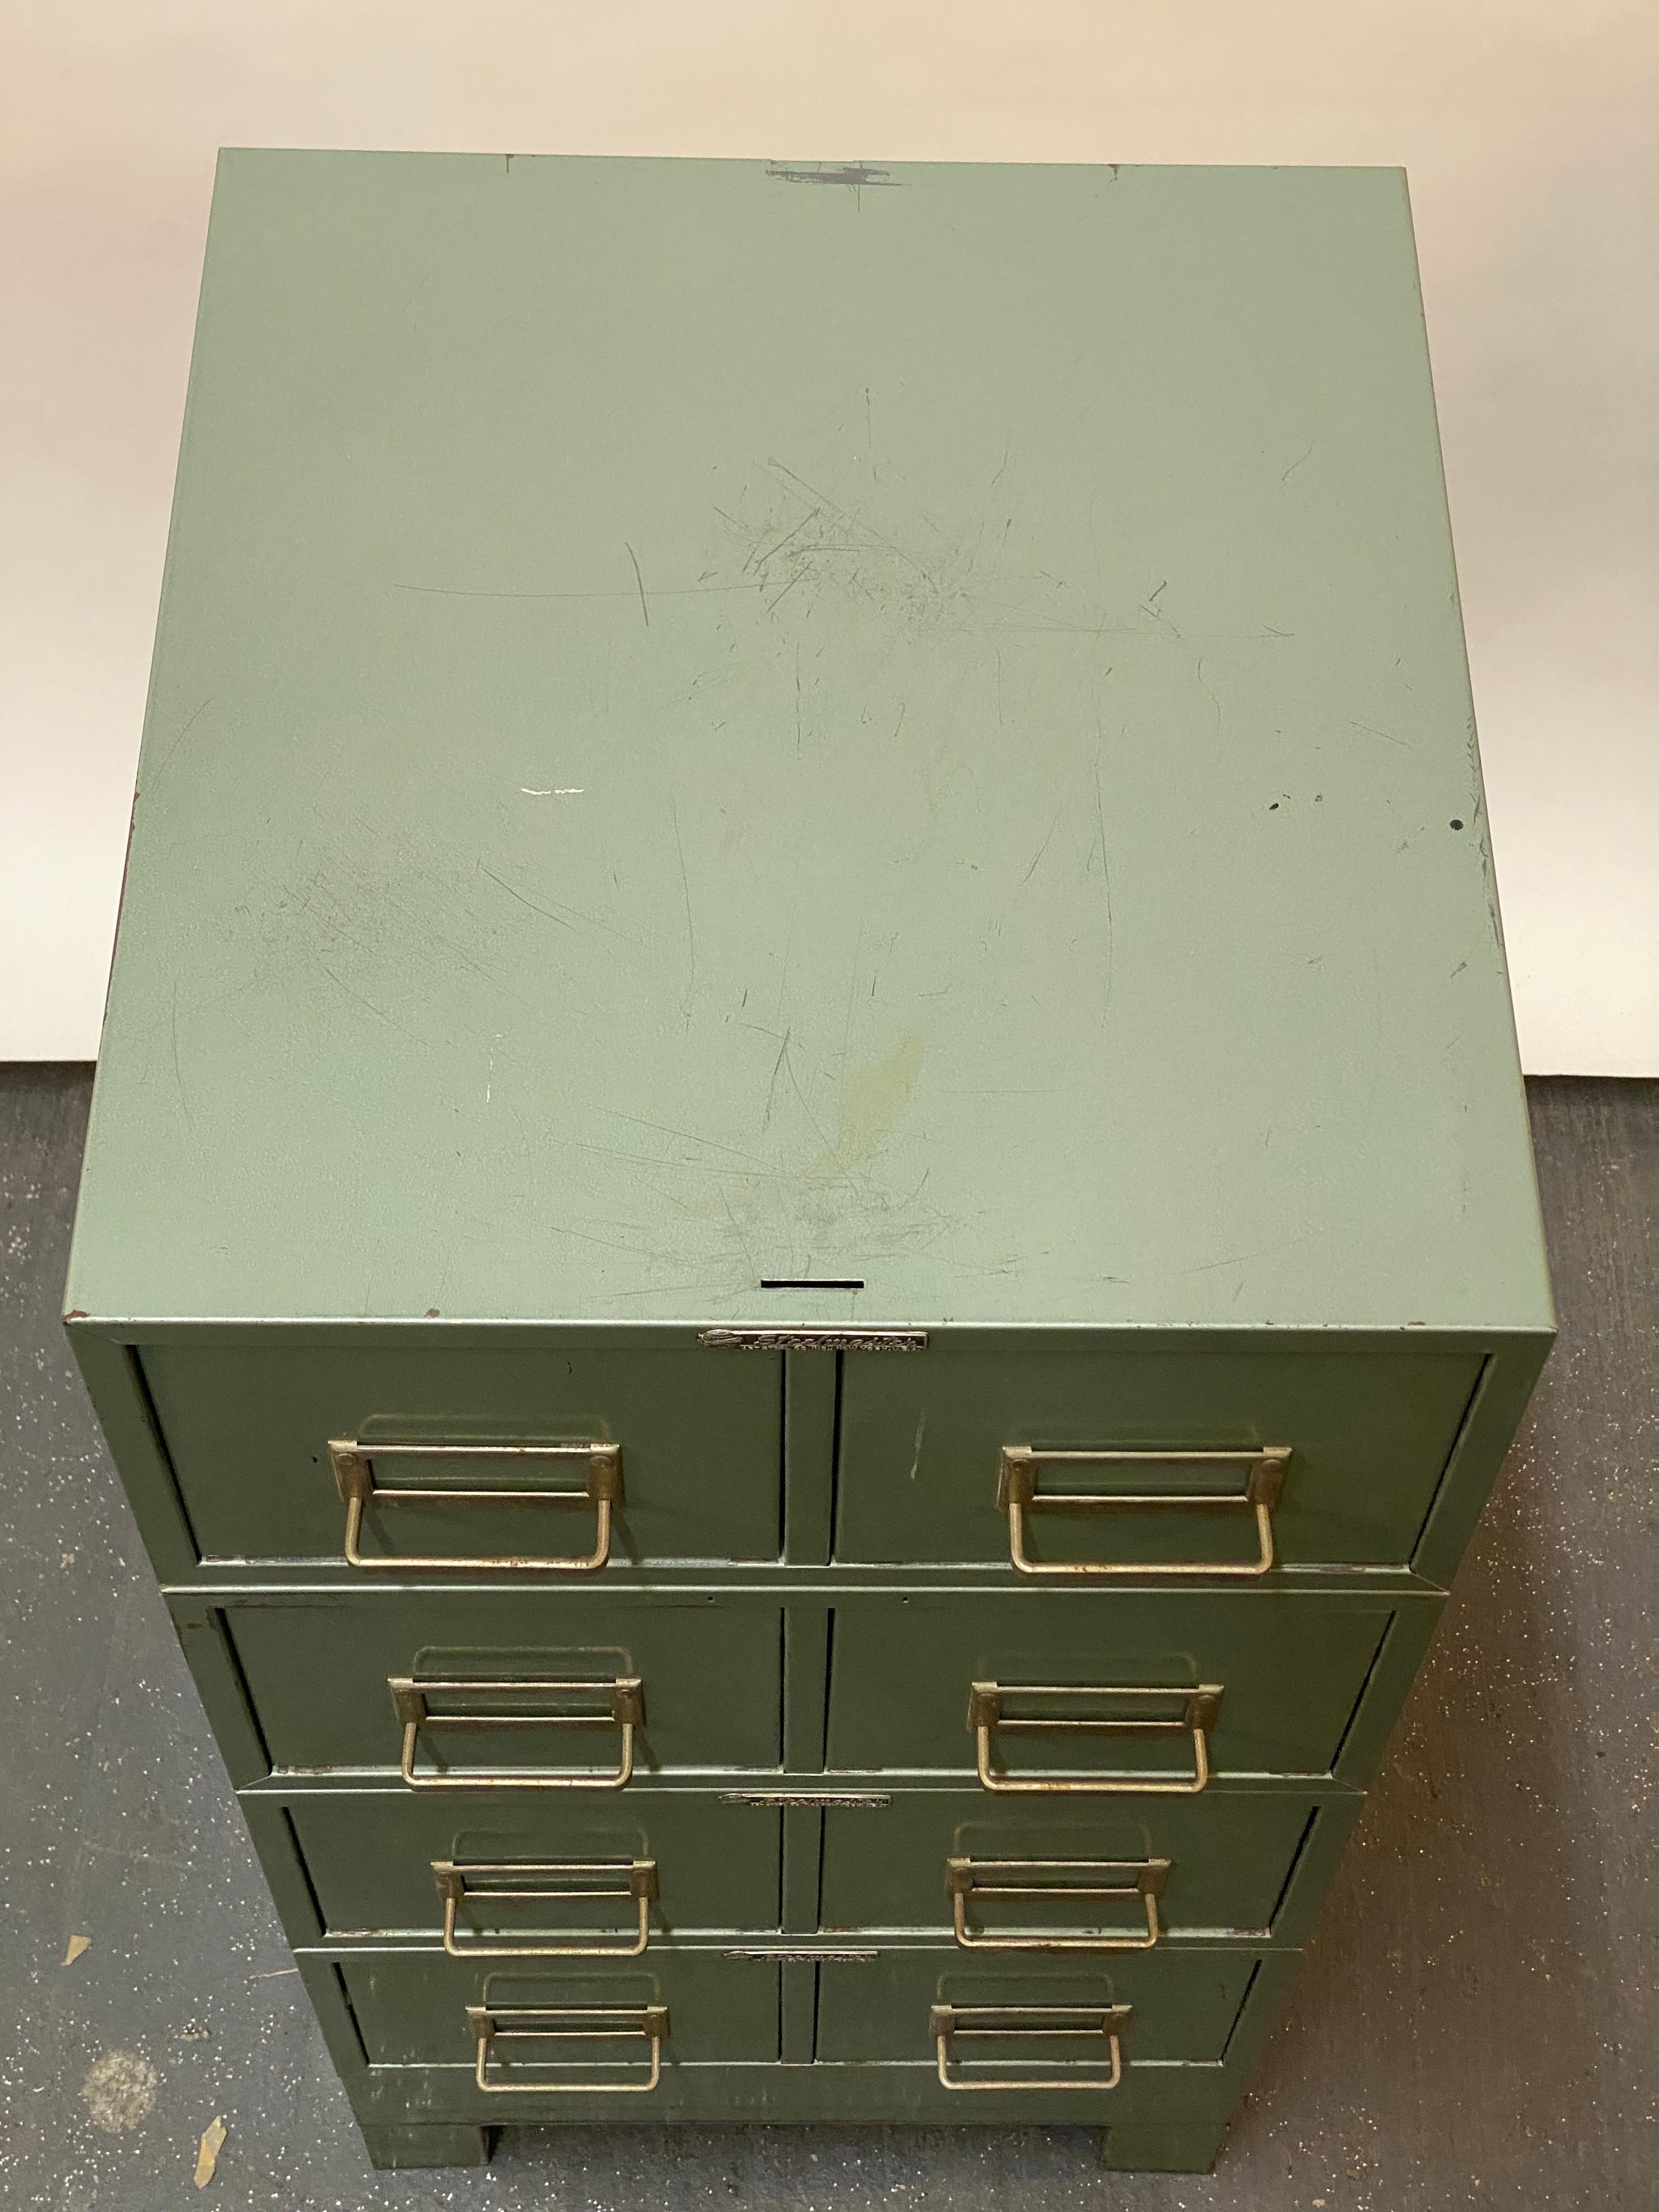 1960s Steelmaster Metallic Green File Cabinets In Good Condition For Sale In Garnerville, NY